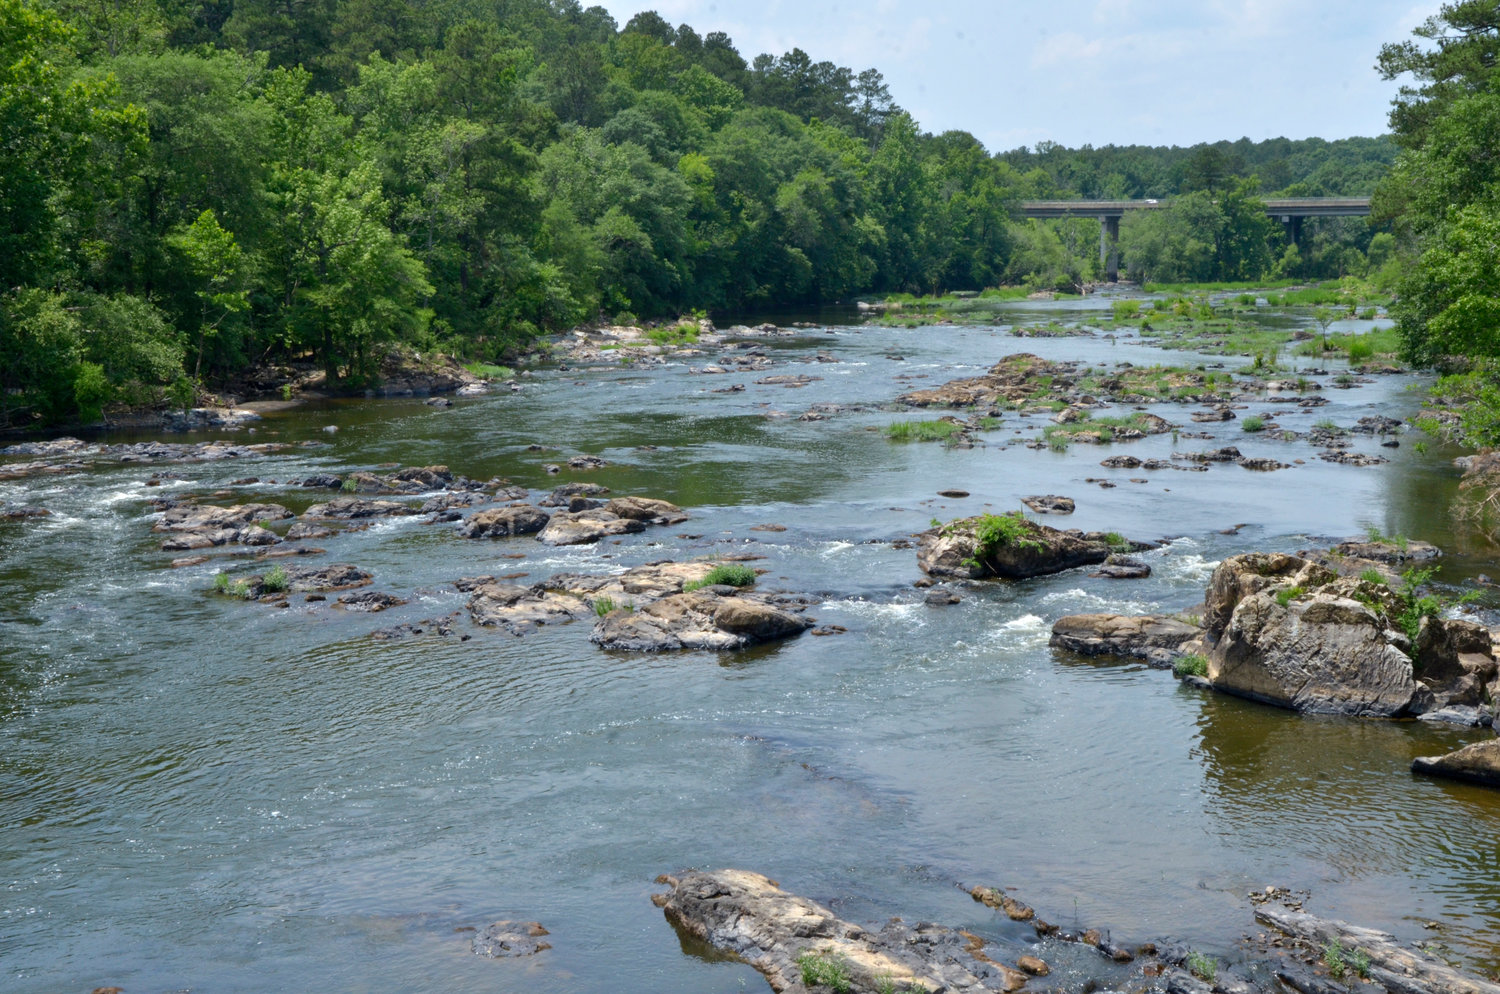 Pictured here is the Haw River, which flows through Pittsboro and supplies the town with its drinking water, and is 'one of the most impacted' waterways in terms of unregulated chemicals in the Cape Fear Basin.